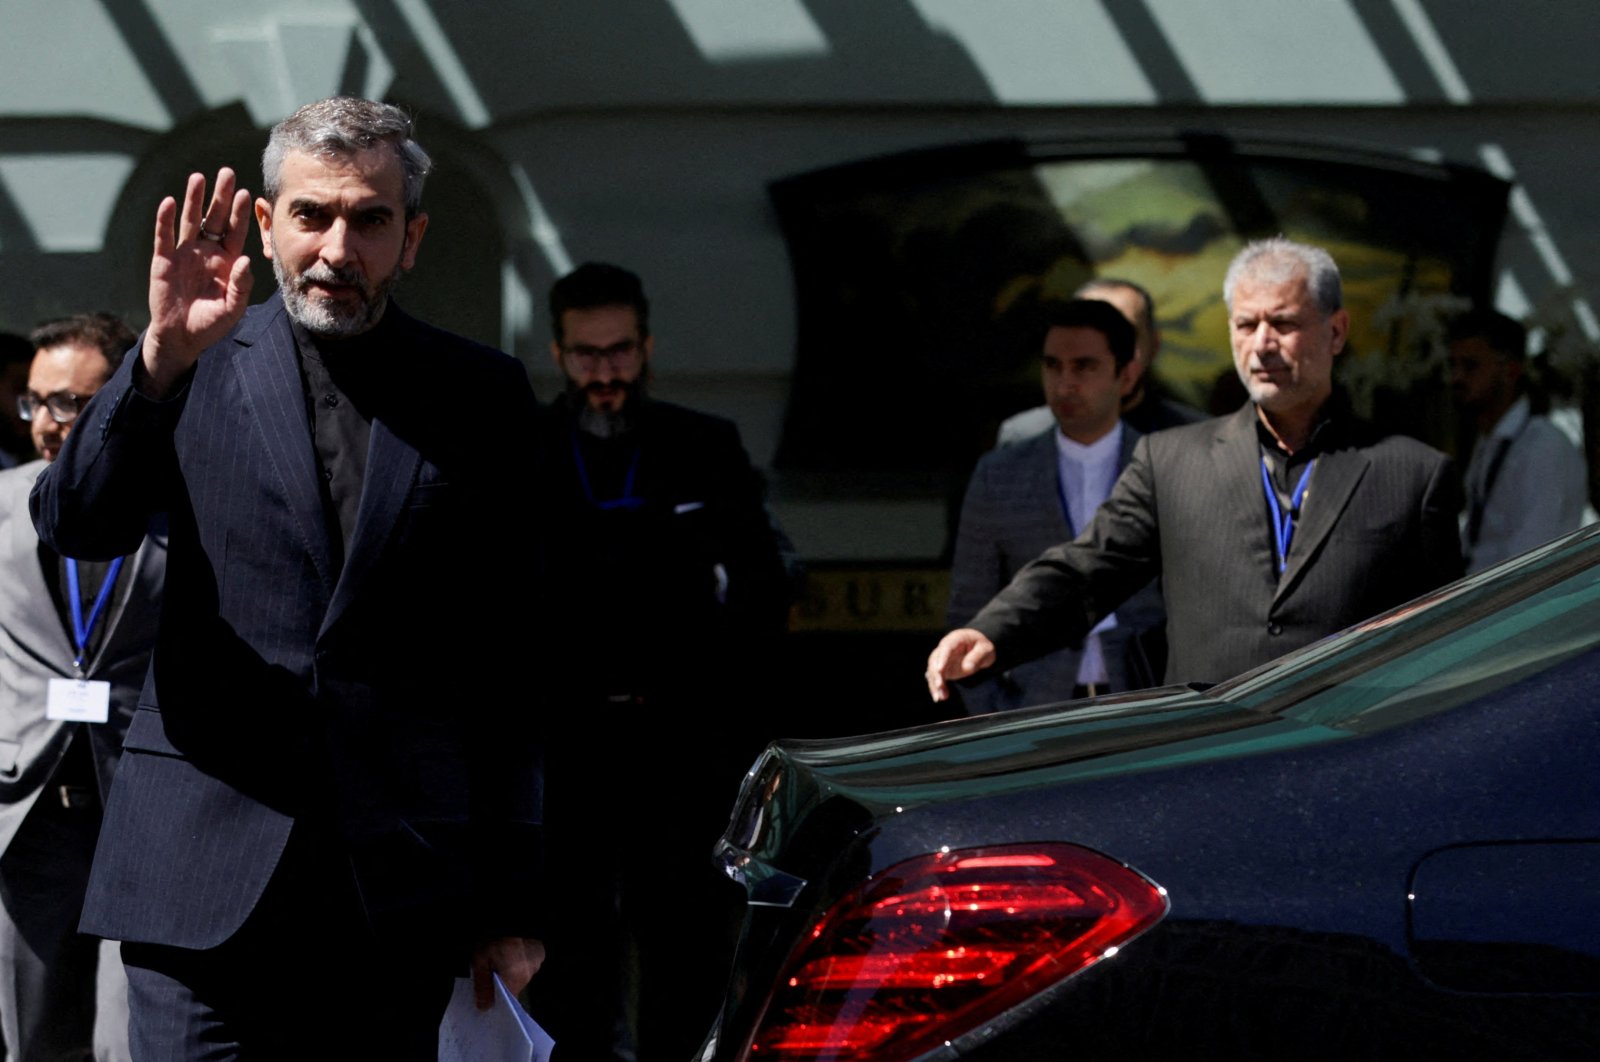 Iran&#039;s chief nuclear negotiator Ali Bagheri Kani leaves the Palais Coburg, the venue where closed-door nuclear talks take place in Vienna, Austria, Aug. 4, 2022. (Reuters Photo)